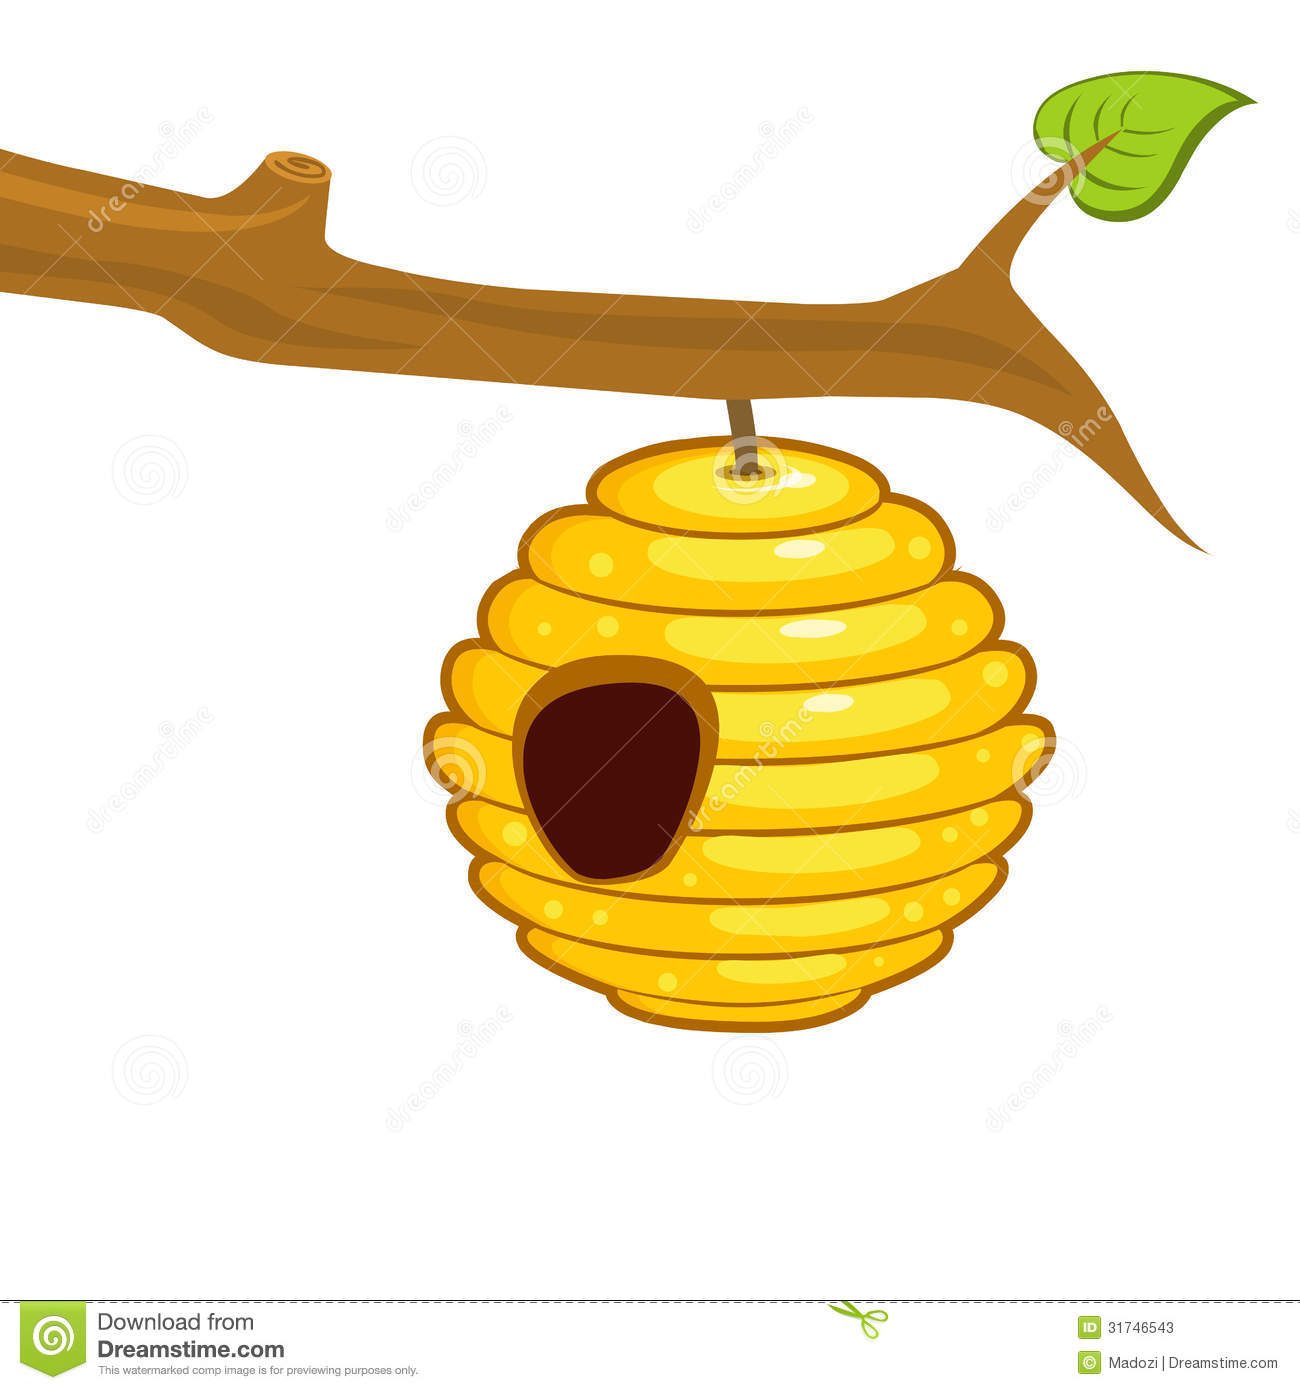 beehive clipart